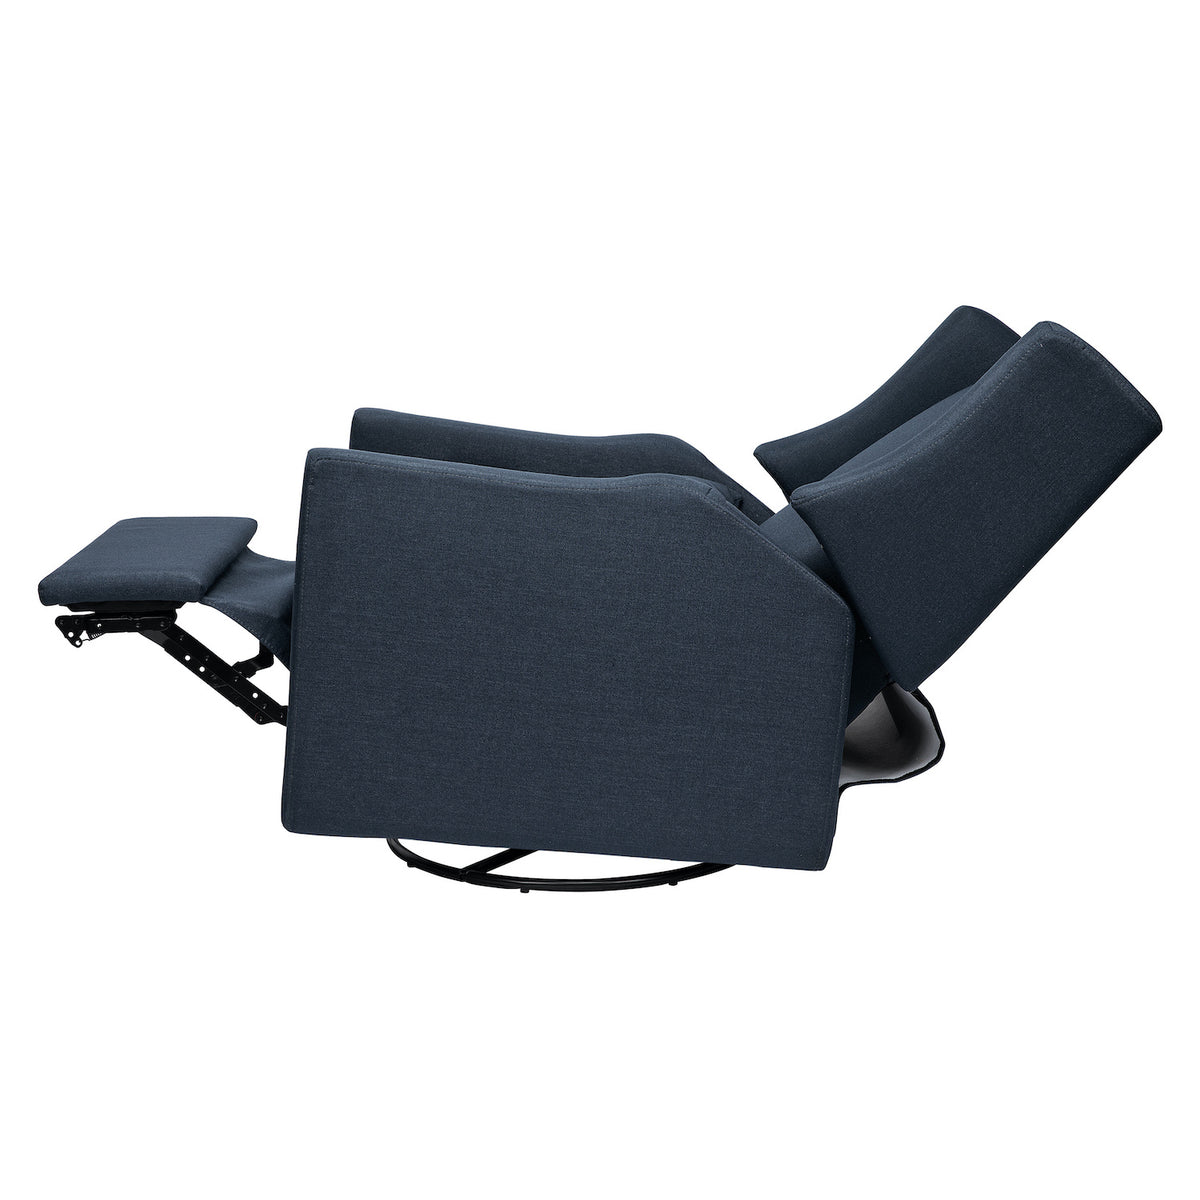 Kiwi Electronic Recliner and Swivel Glider in Eco-Performance Fabric with USB port - Navy